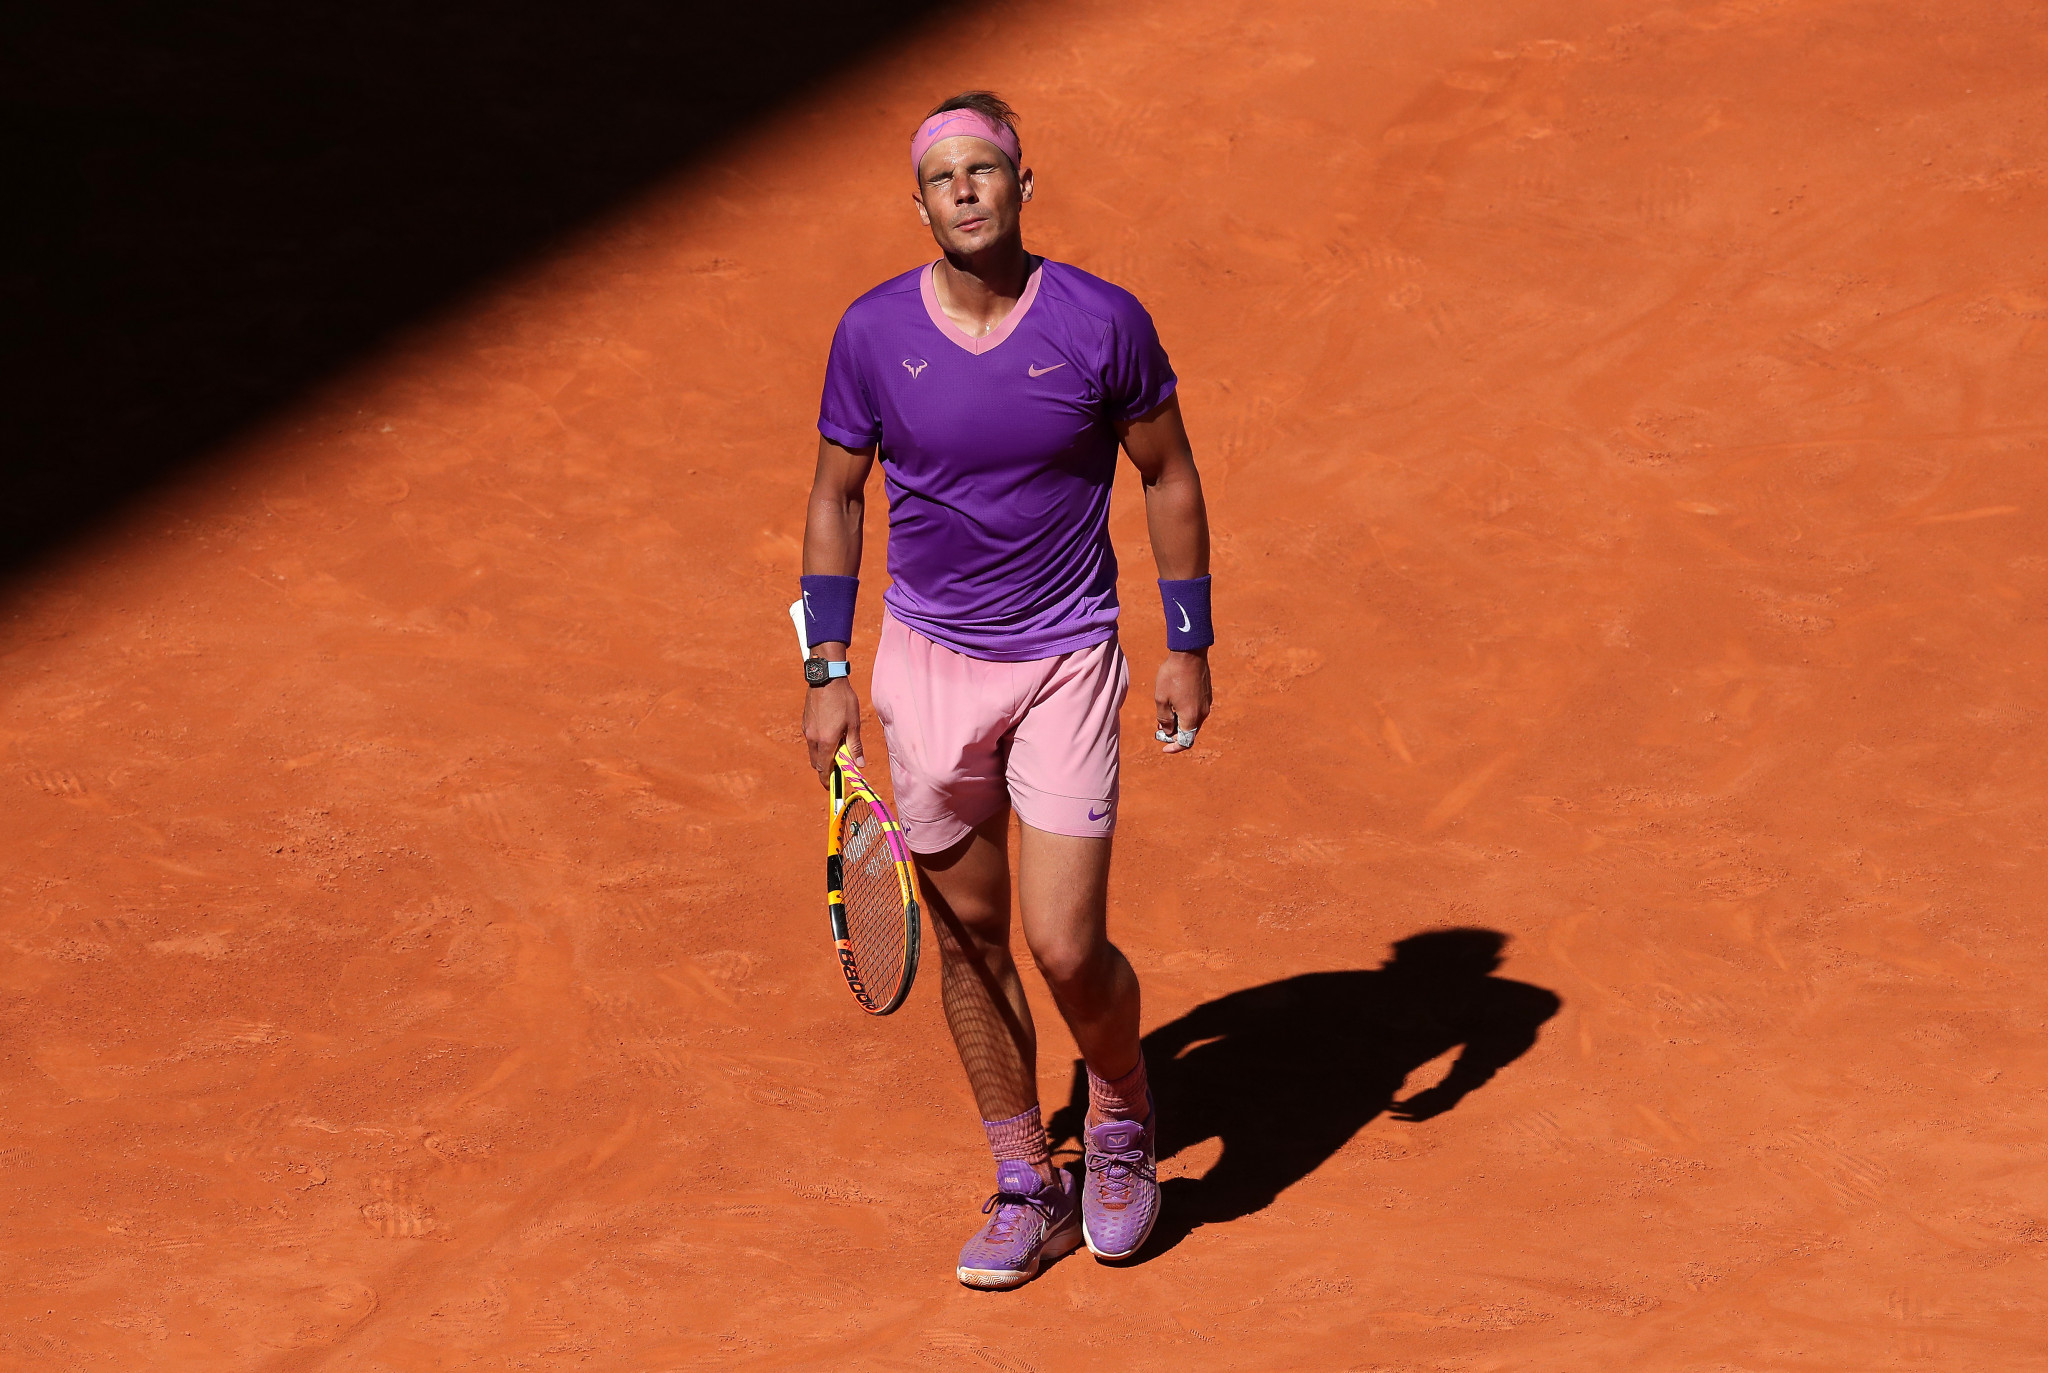 Men’s top seed Nadal suffers surprise quarter-final exit at Madrid Open